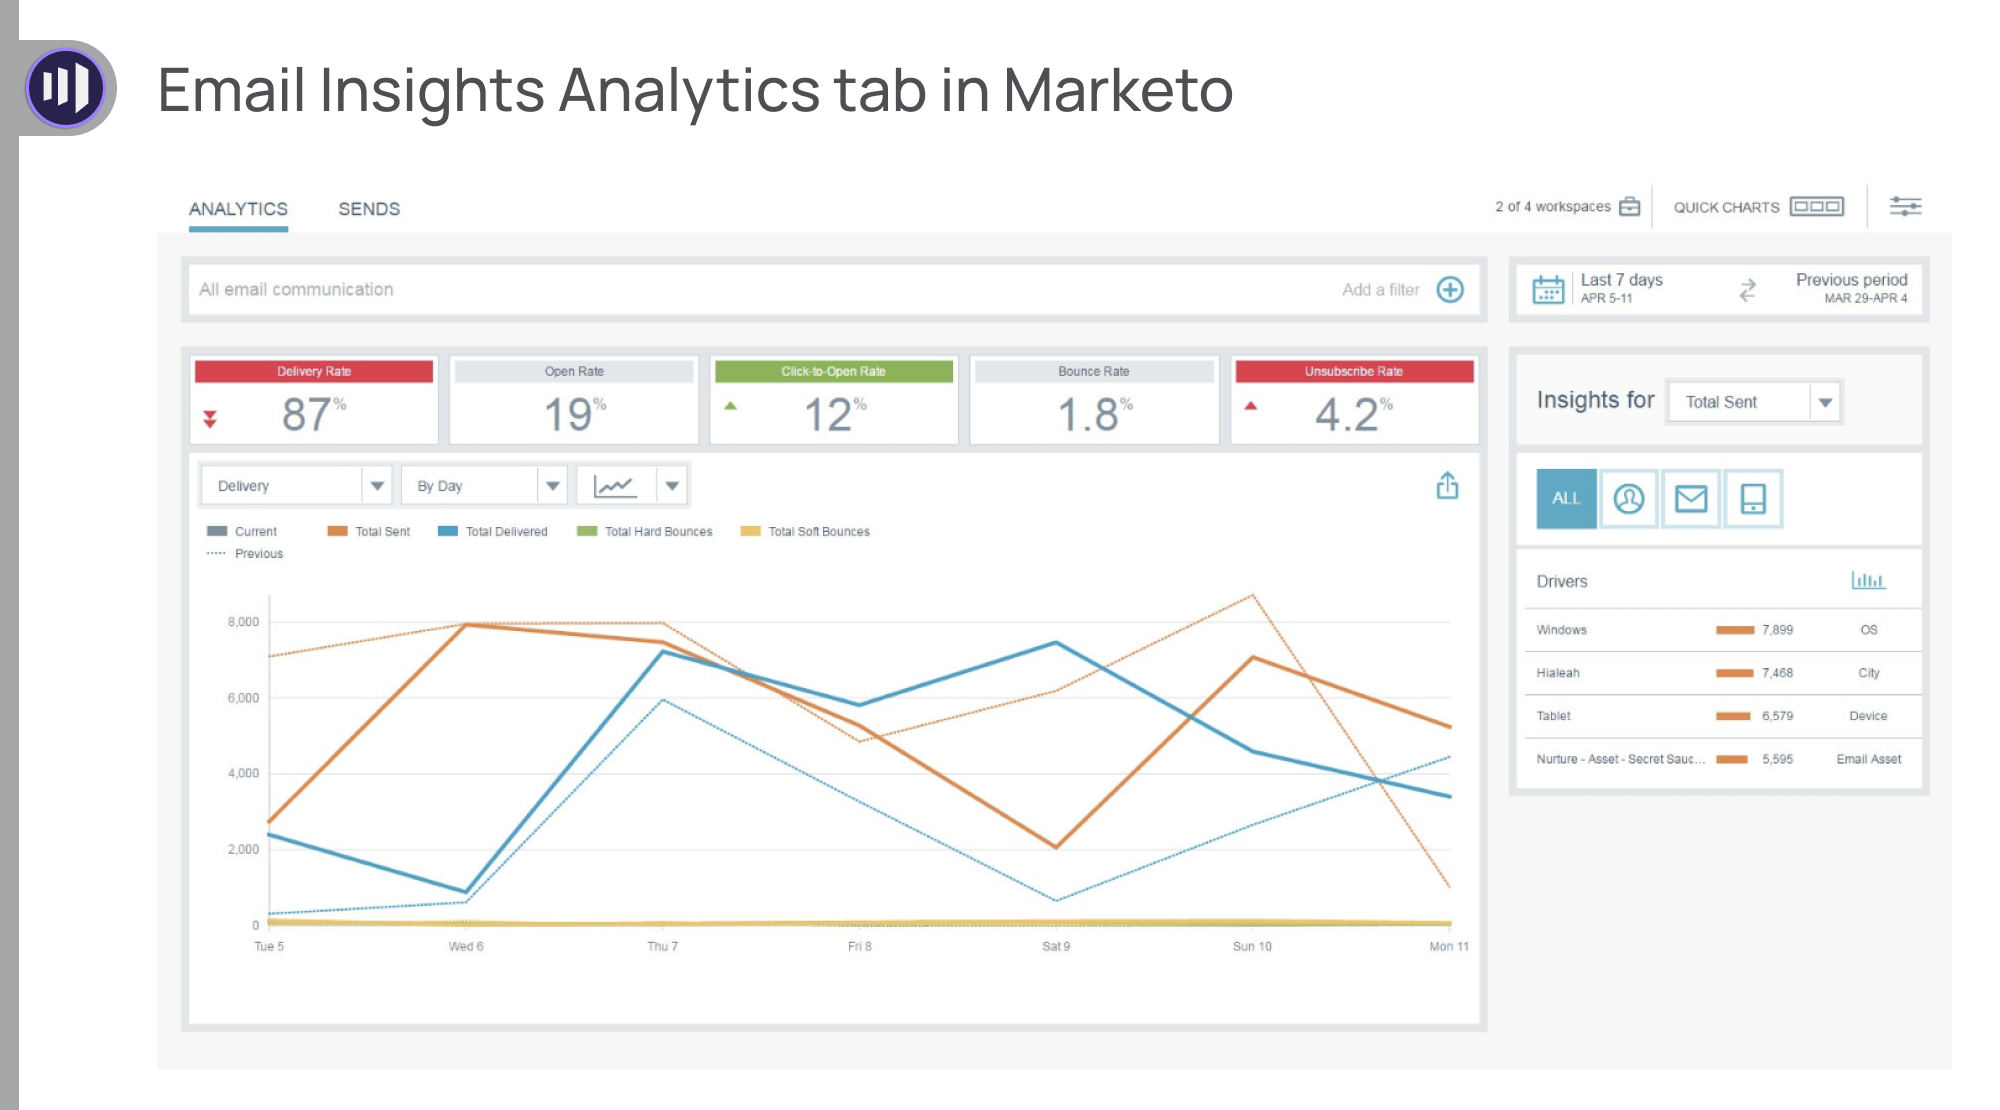 Email Insights Analytics tab in Marketo